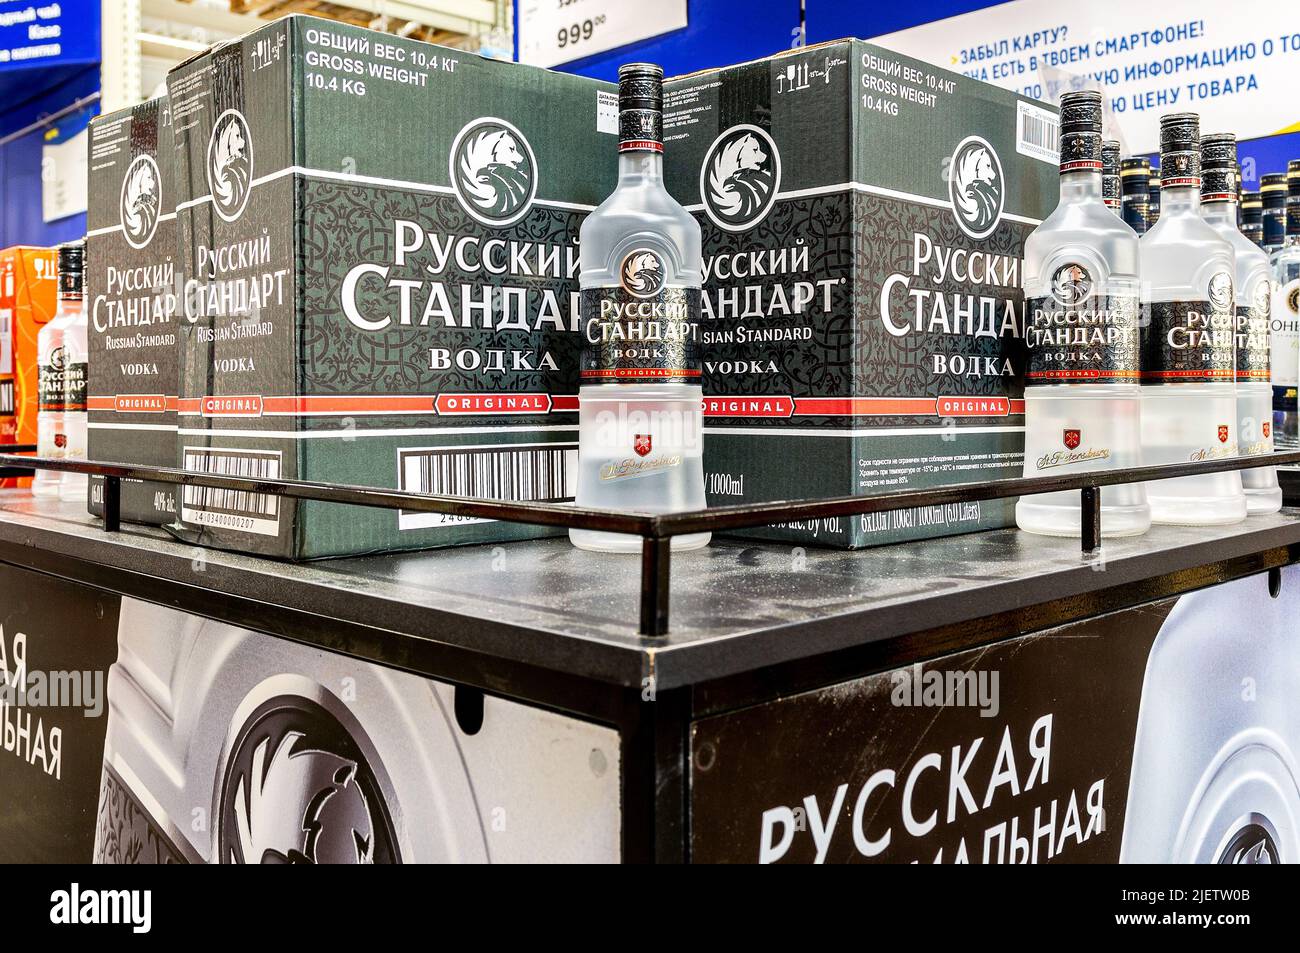 Samara, Russia - June 25, 2022: Russian Standard vodka on display for sale in a superstore Stock Photo